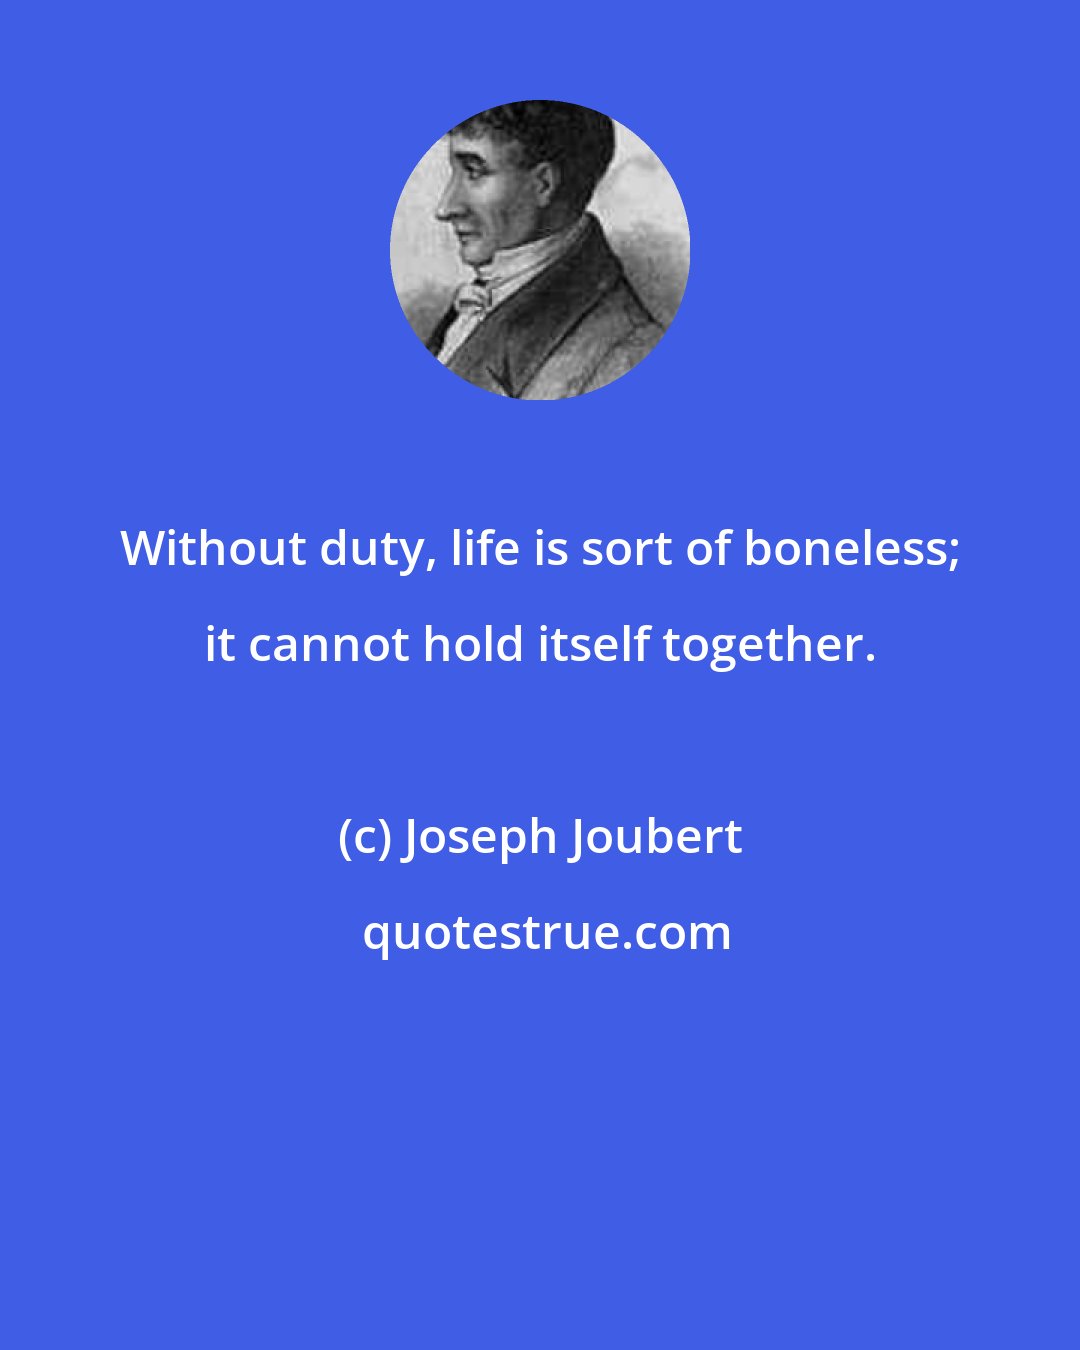 Joseph Joubert: Without duty, life is sort of boneless; it cannot hold itself together.